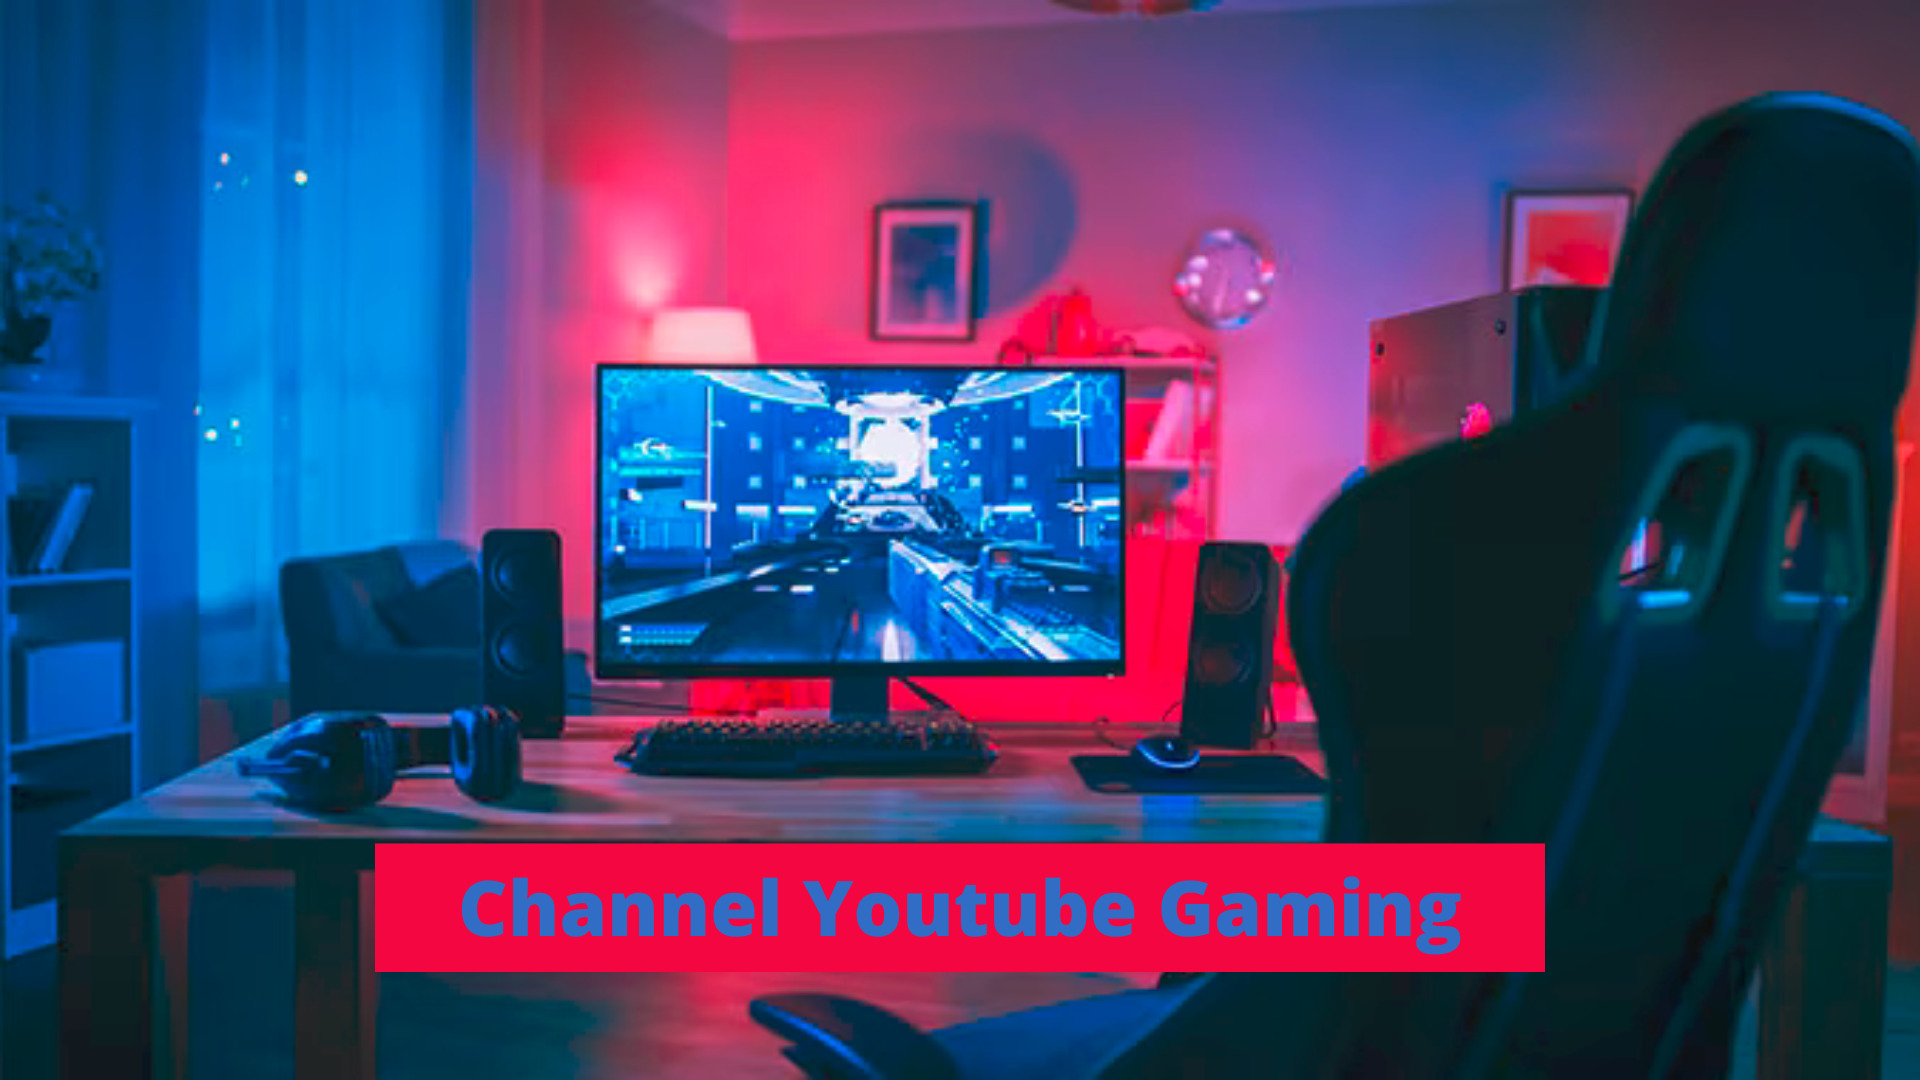 channel youtube gaming